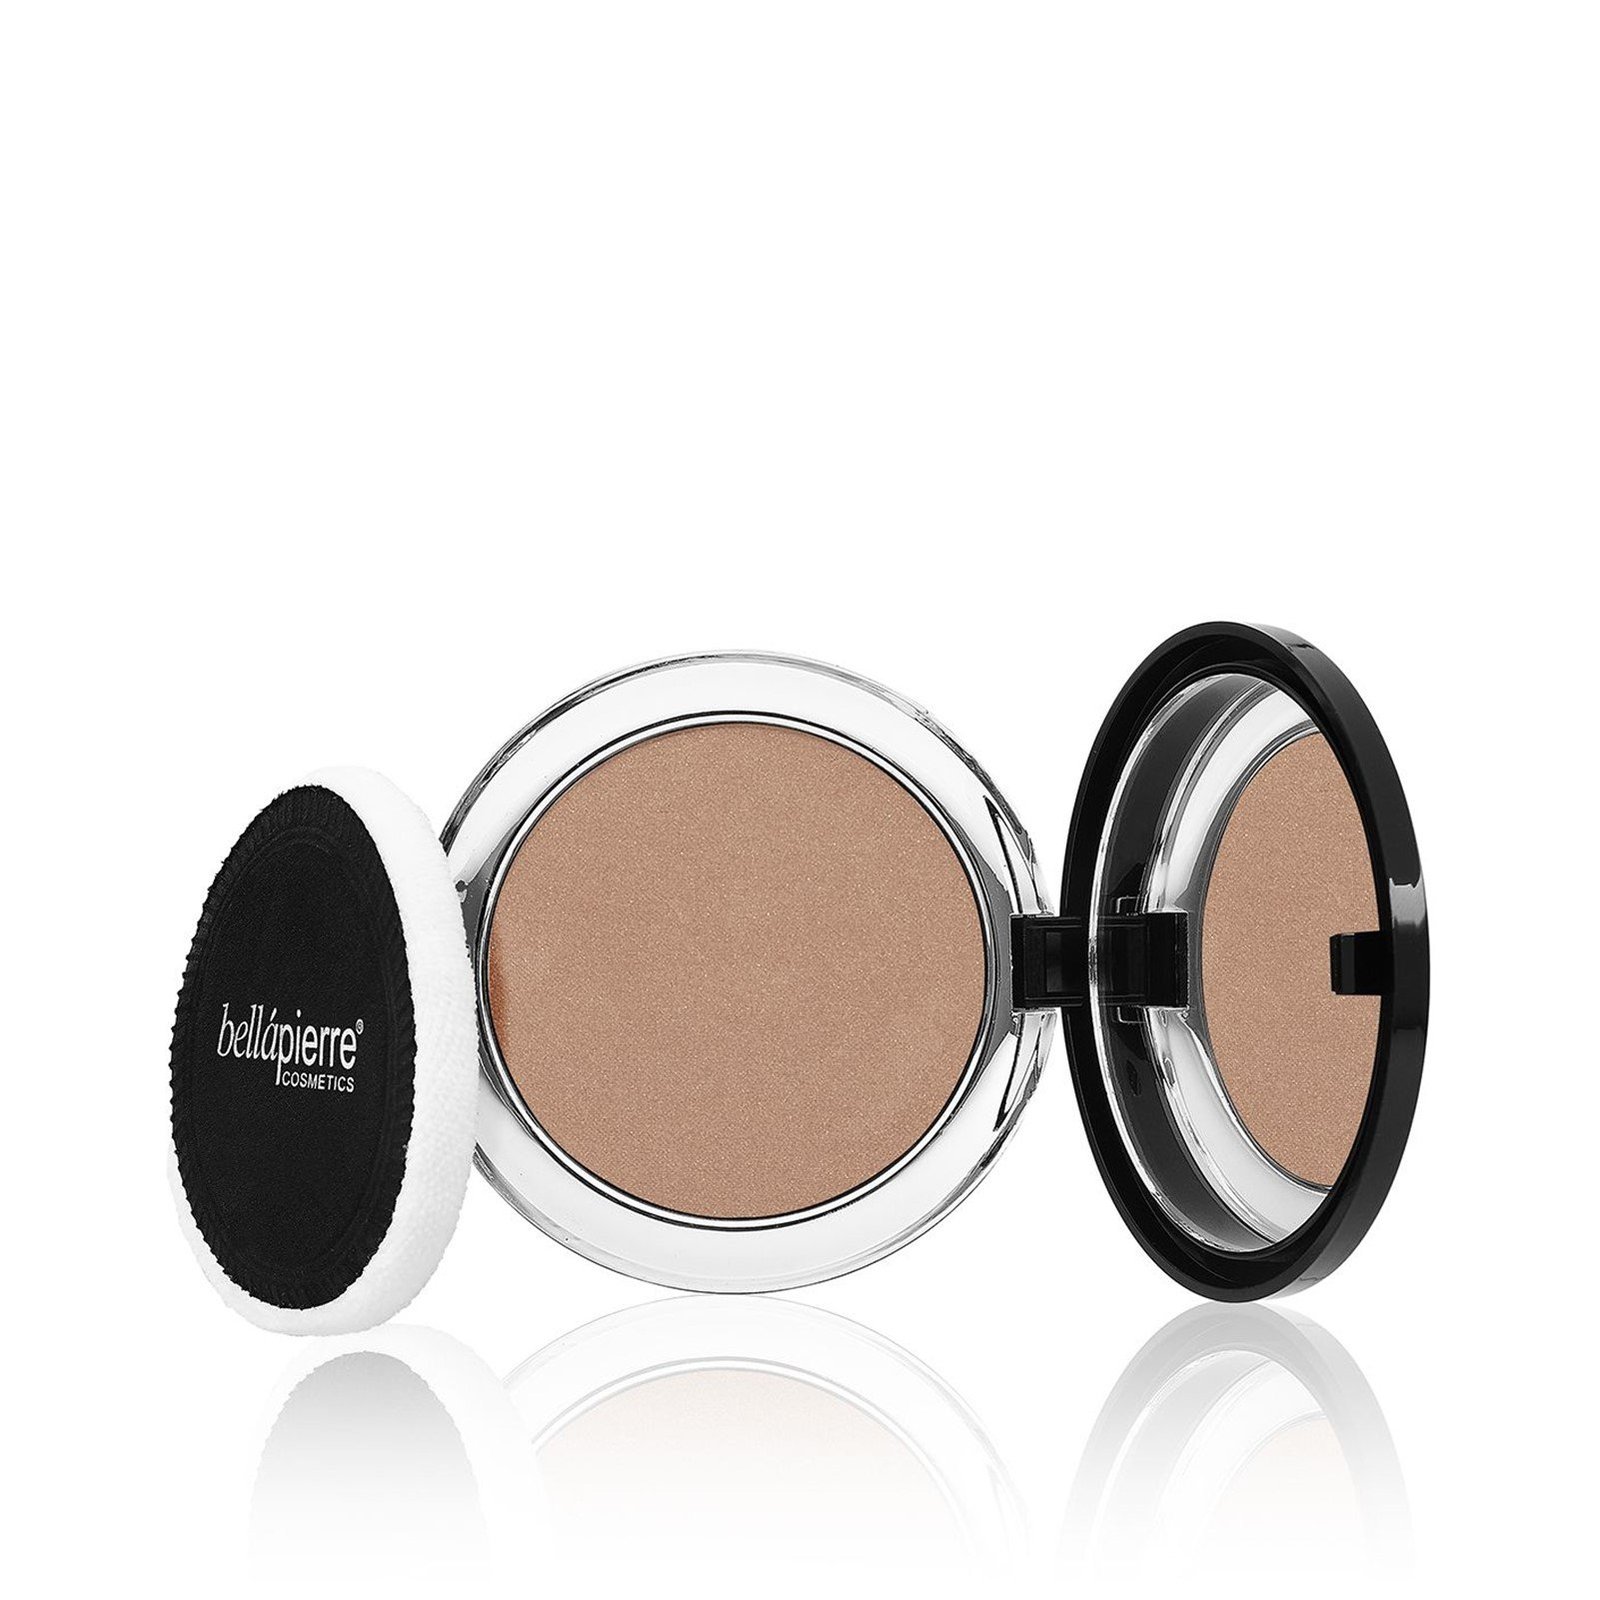 Bellapierre Cosmetics Compact Mineral Face & Body Bronzer Pure Element 10g